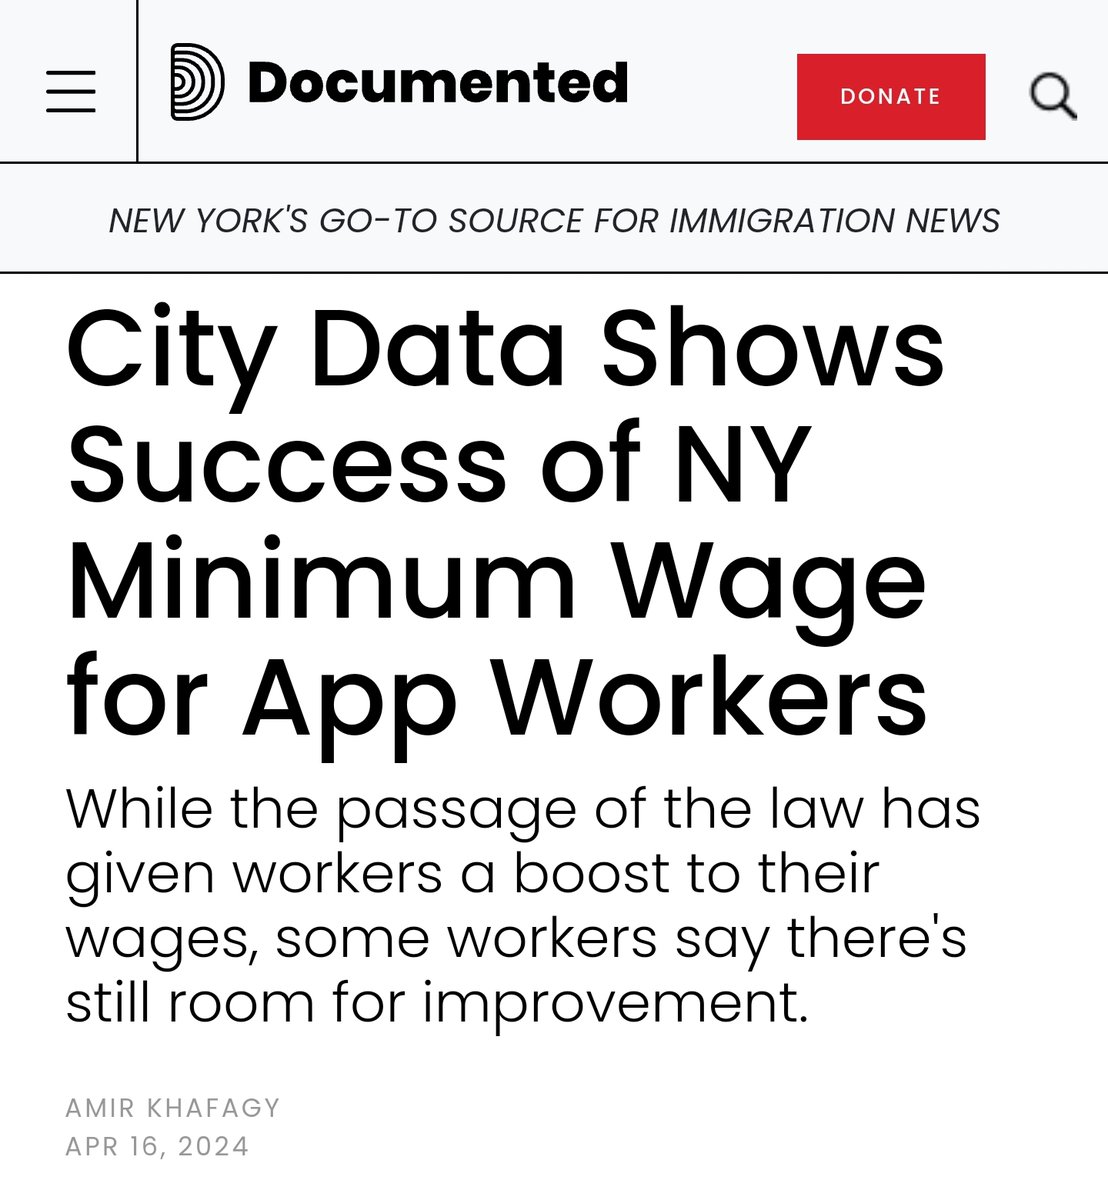 'The minimum pay rate has been enormously successful in raising wages for our city’s delivery workers and providing them greater means to support themselves and their families,” said @helloDCWP Commissioner Vilda Vera Mayuga'